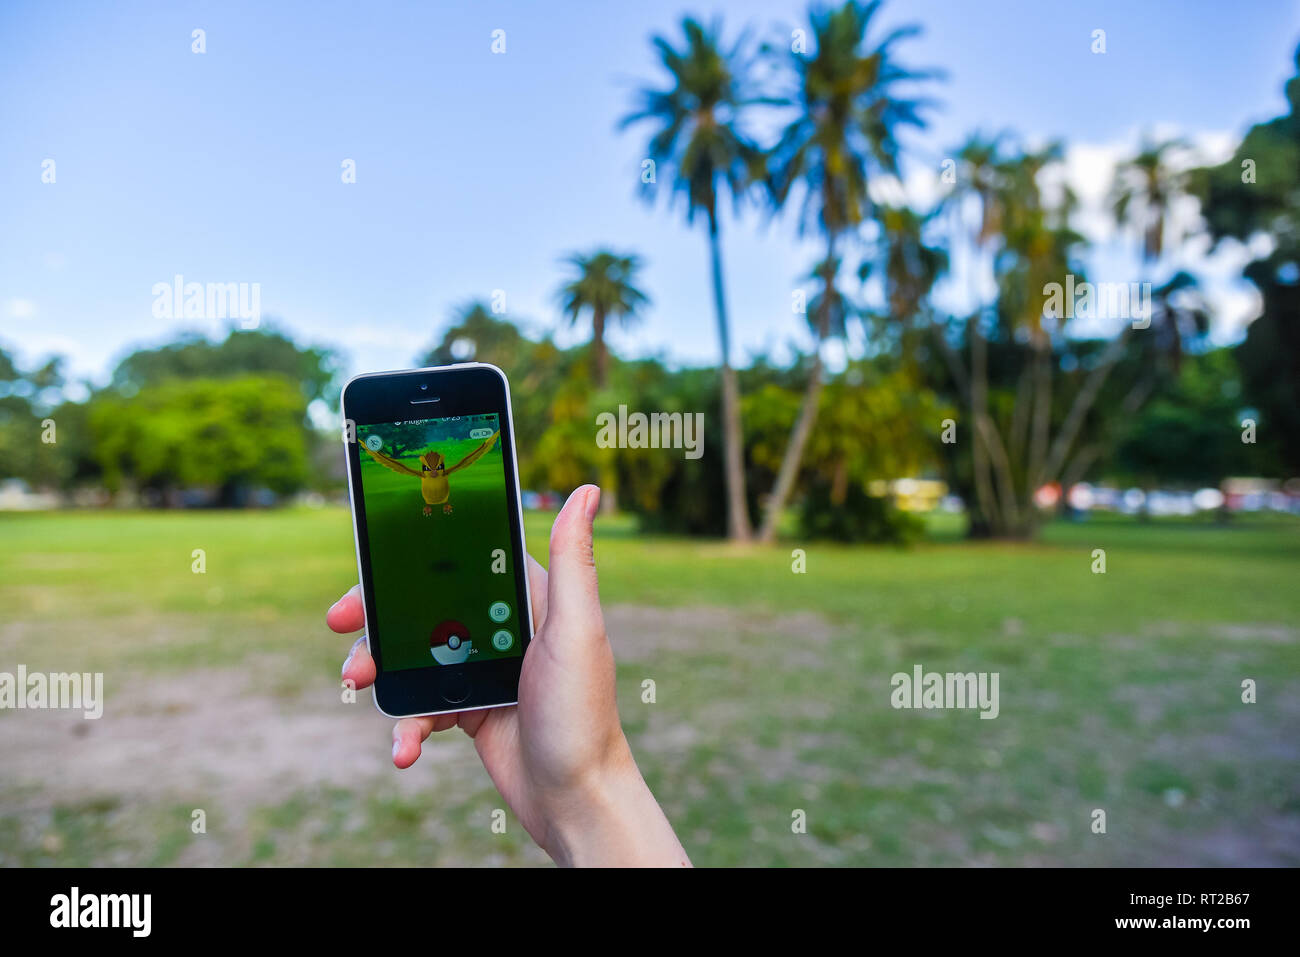 Buenos Aires, Argentina - Nov 11, 2016: Apple iPhone 5c held in one hand showing its screen with Pokemon Go application. Palms on the background. Stock Photo